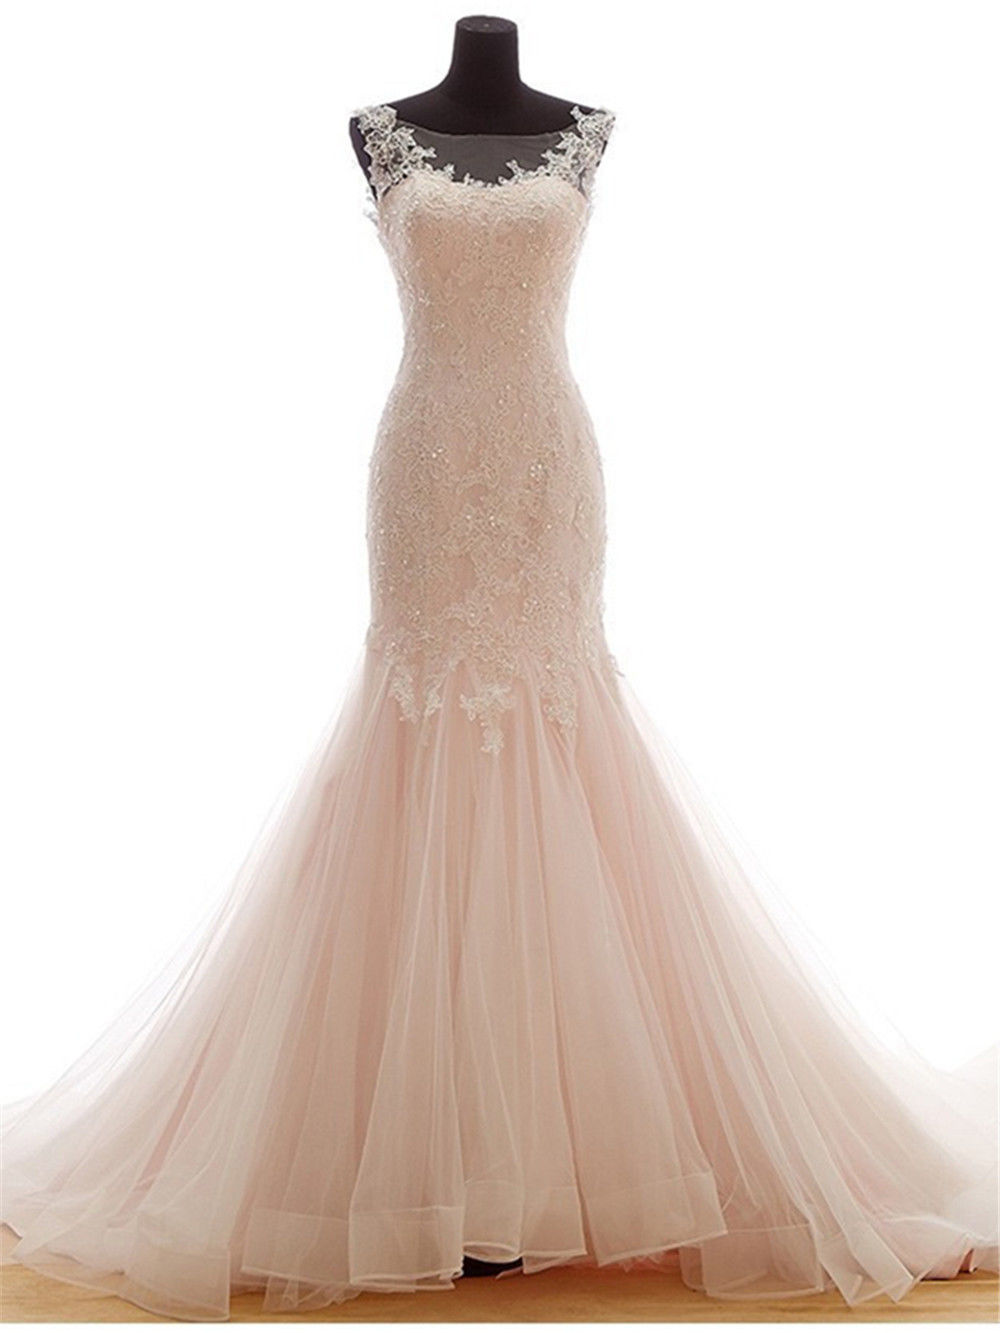 Lace Appliqués And Beaded Embellished Trumpet Tulle Wedding Dress Featuring Sweetheart Illusion Neckline